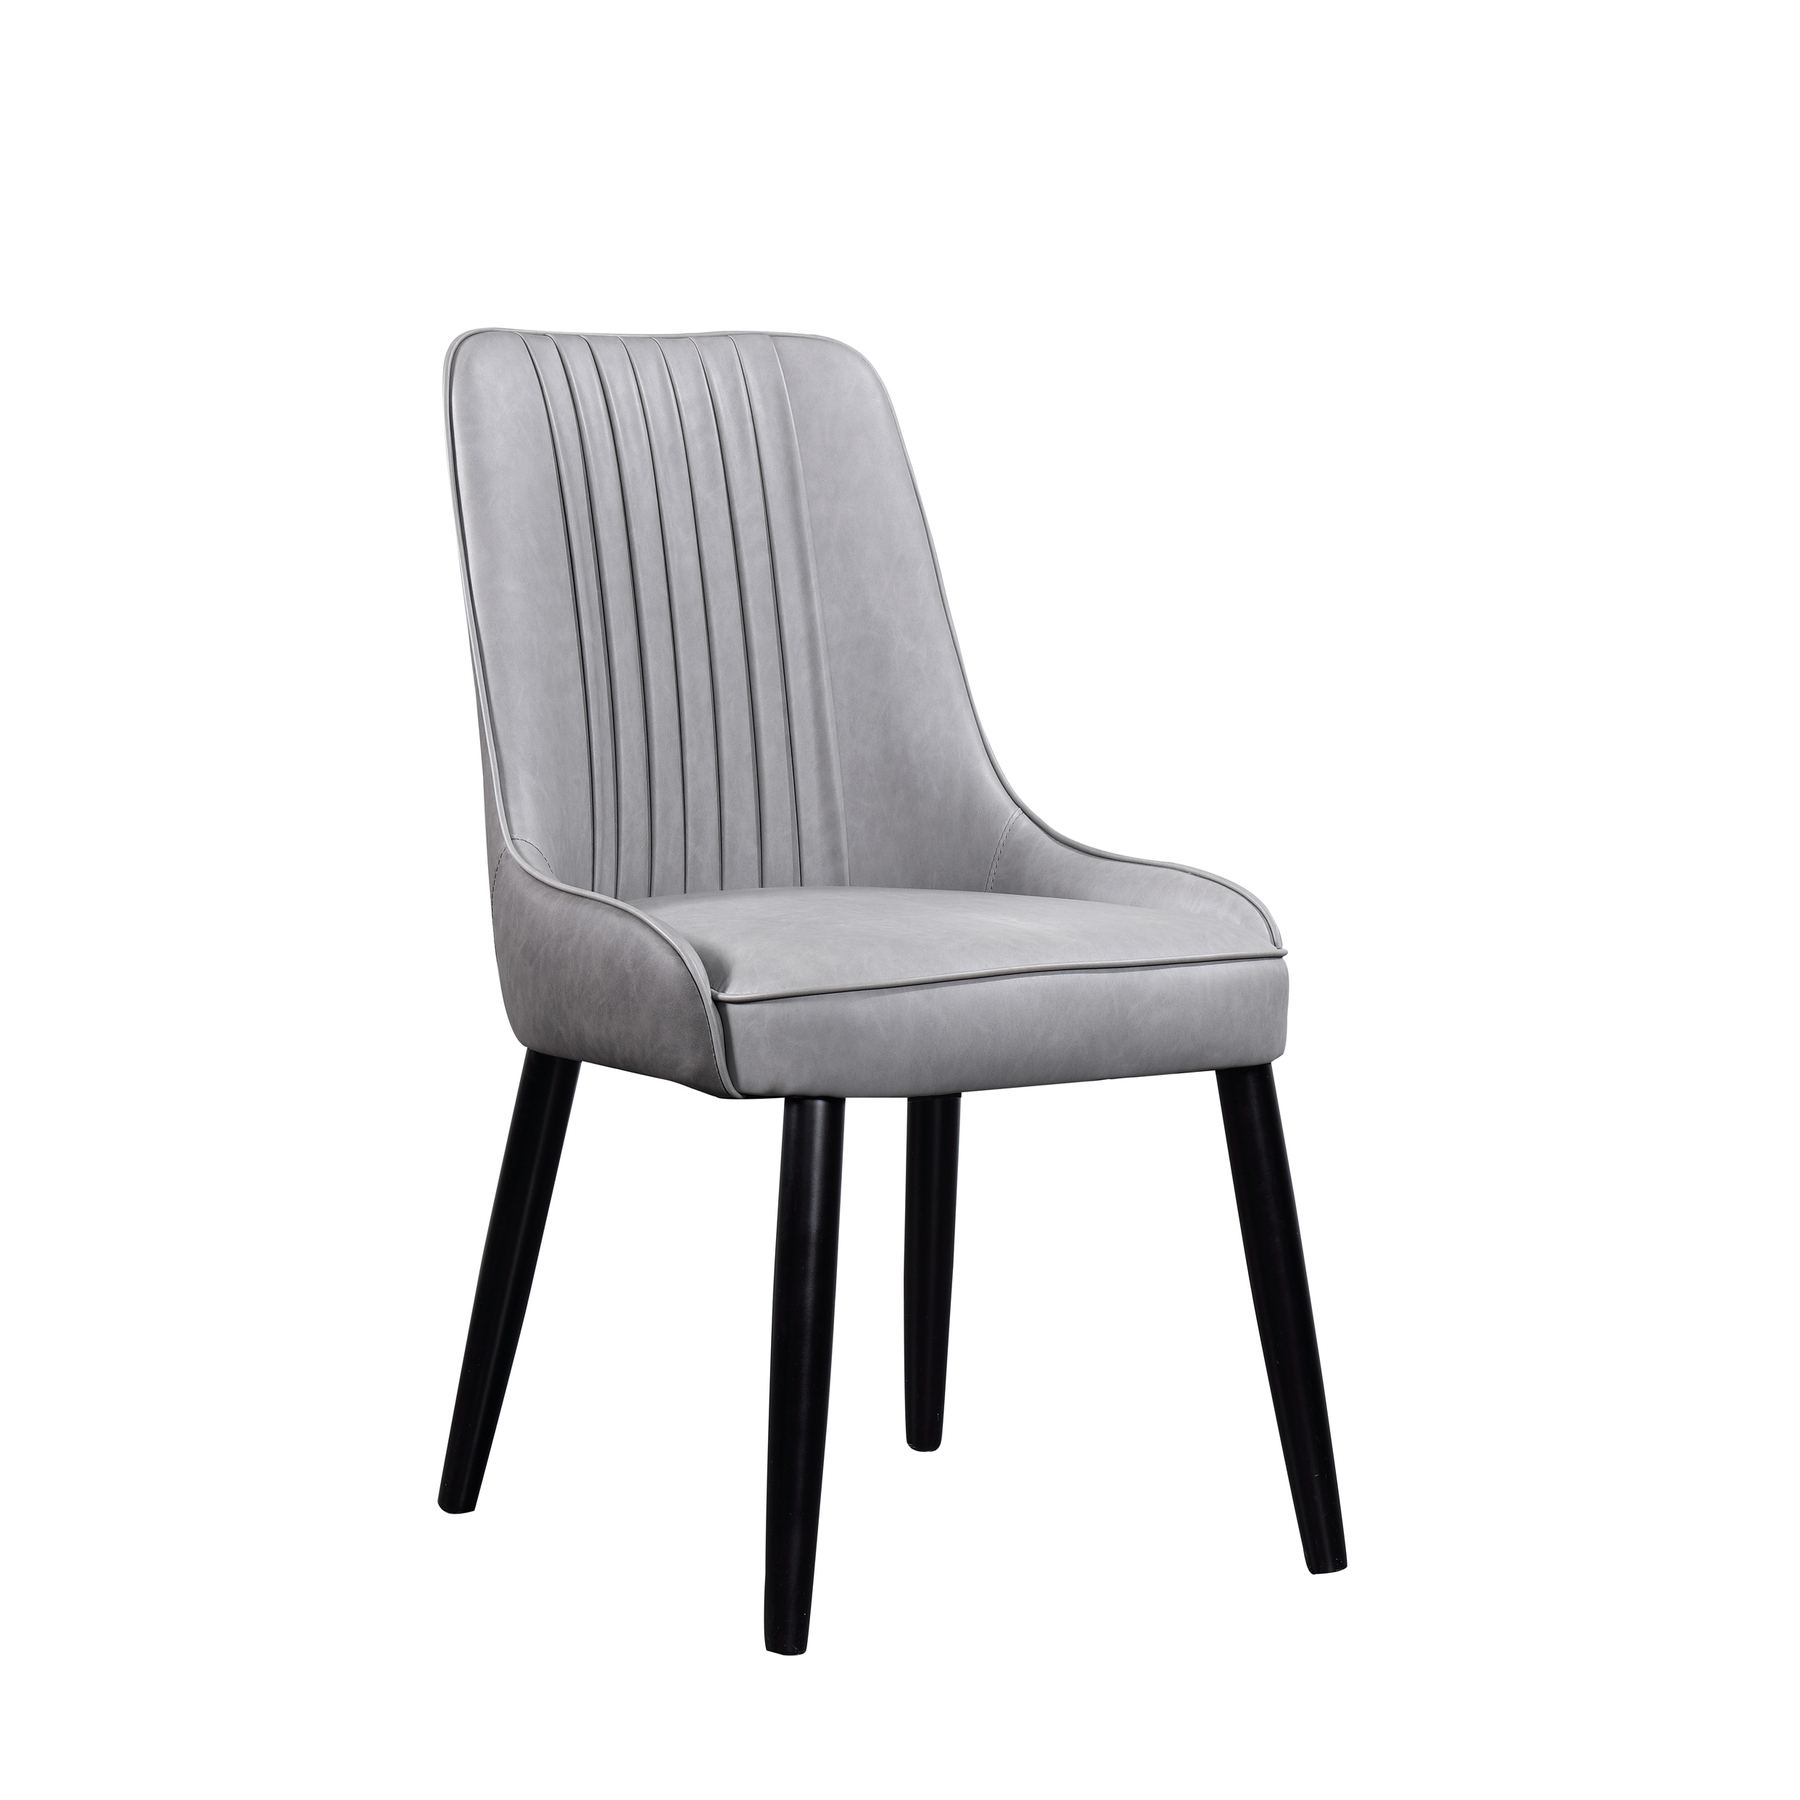 FS-D972 Dining Chair